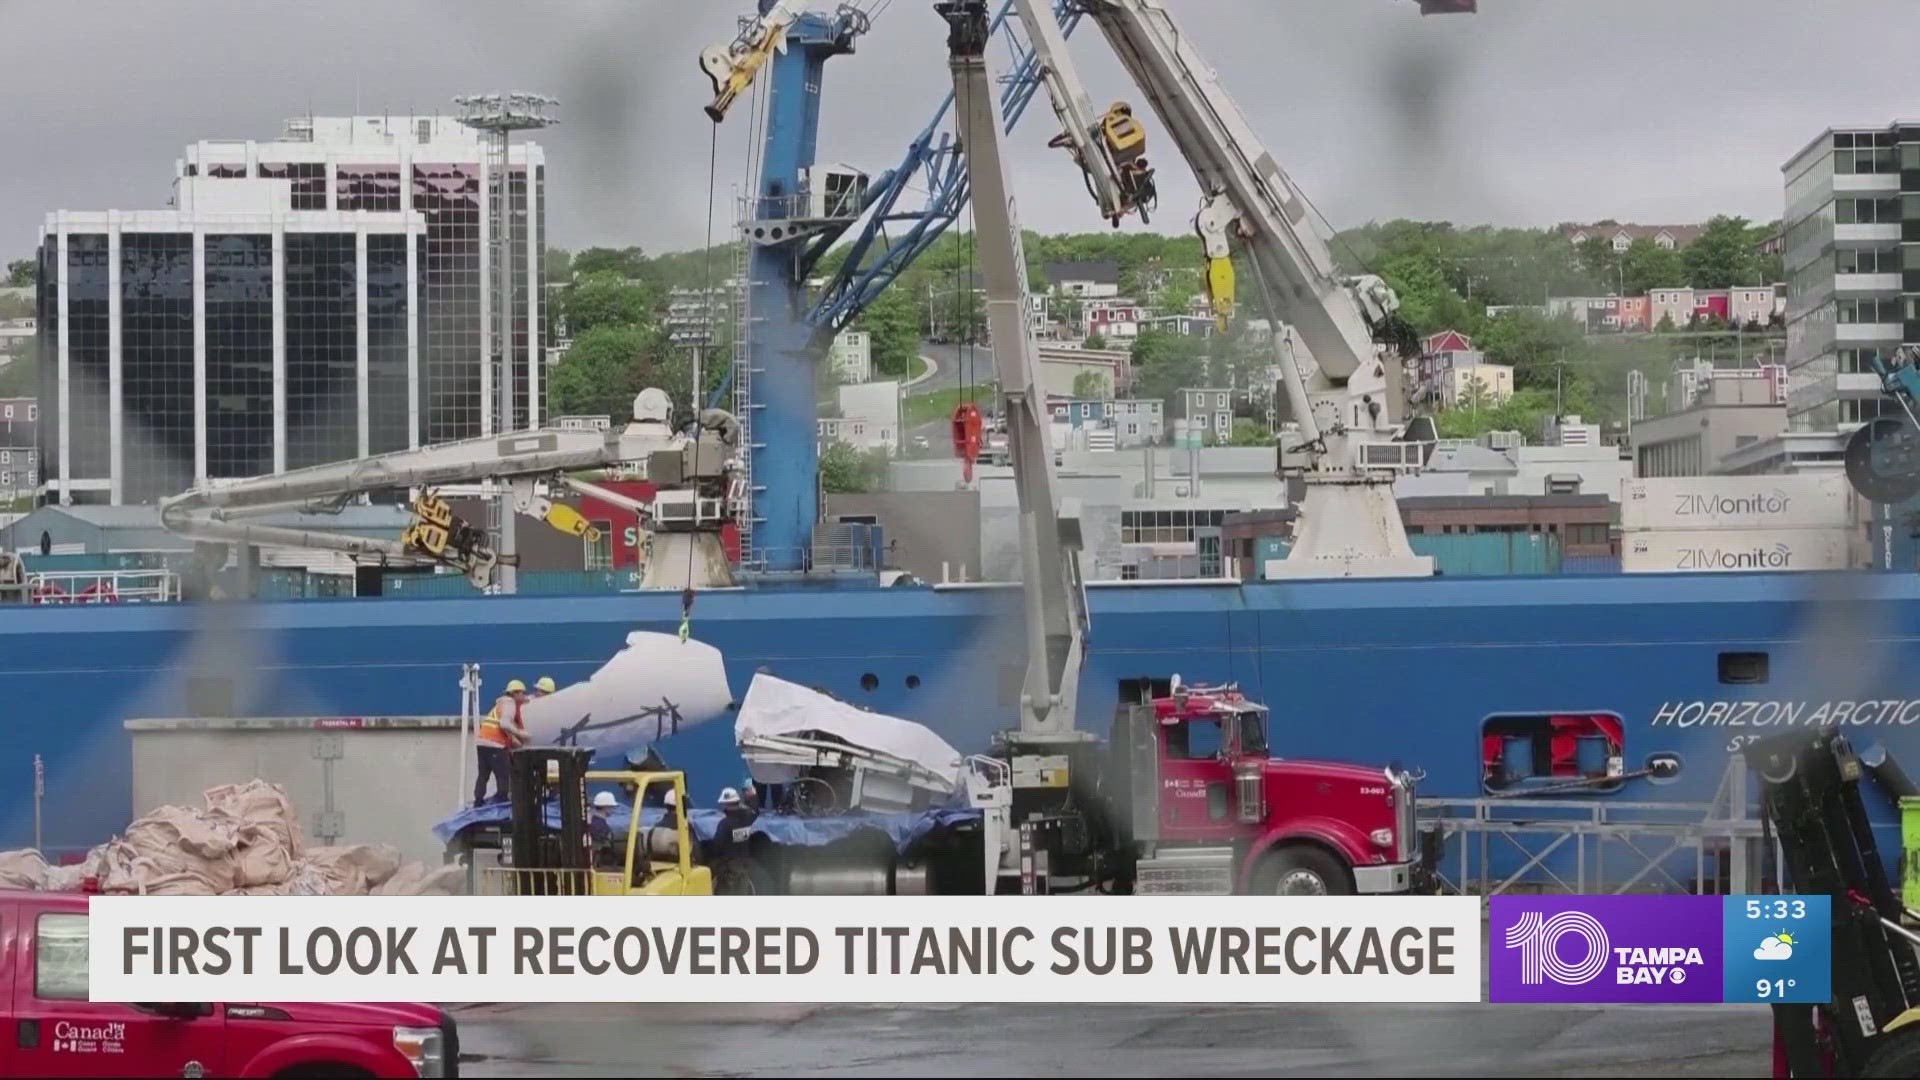 Human Remains Found in Titanic Submarine Wreckage, US Coast Guard Confirms